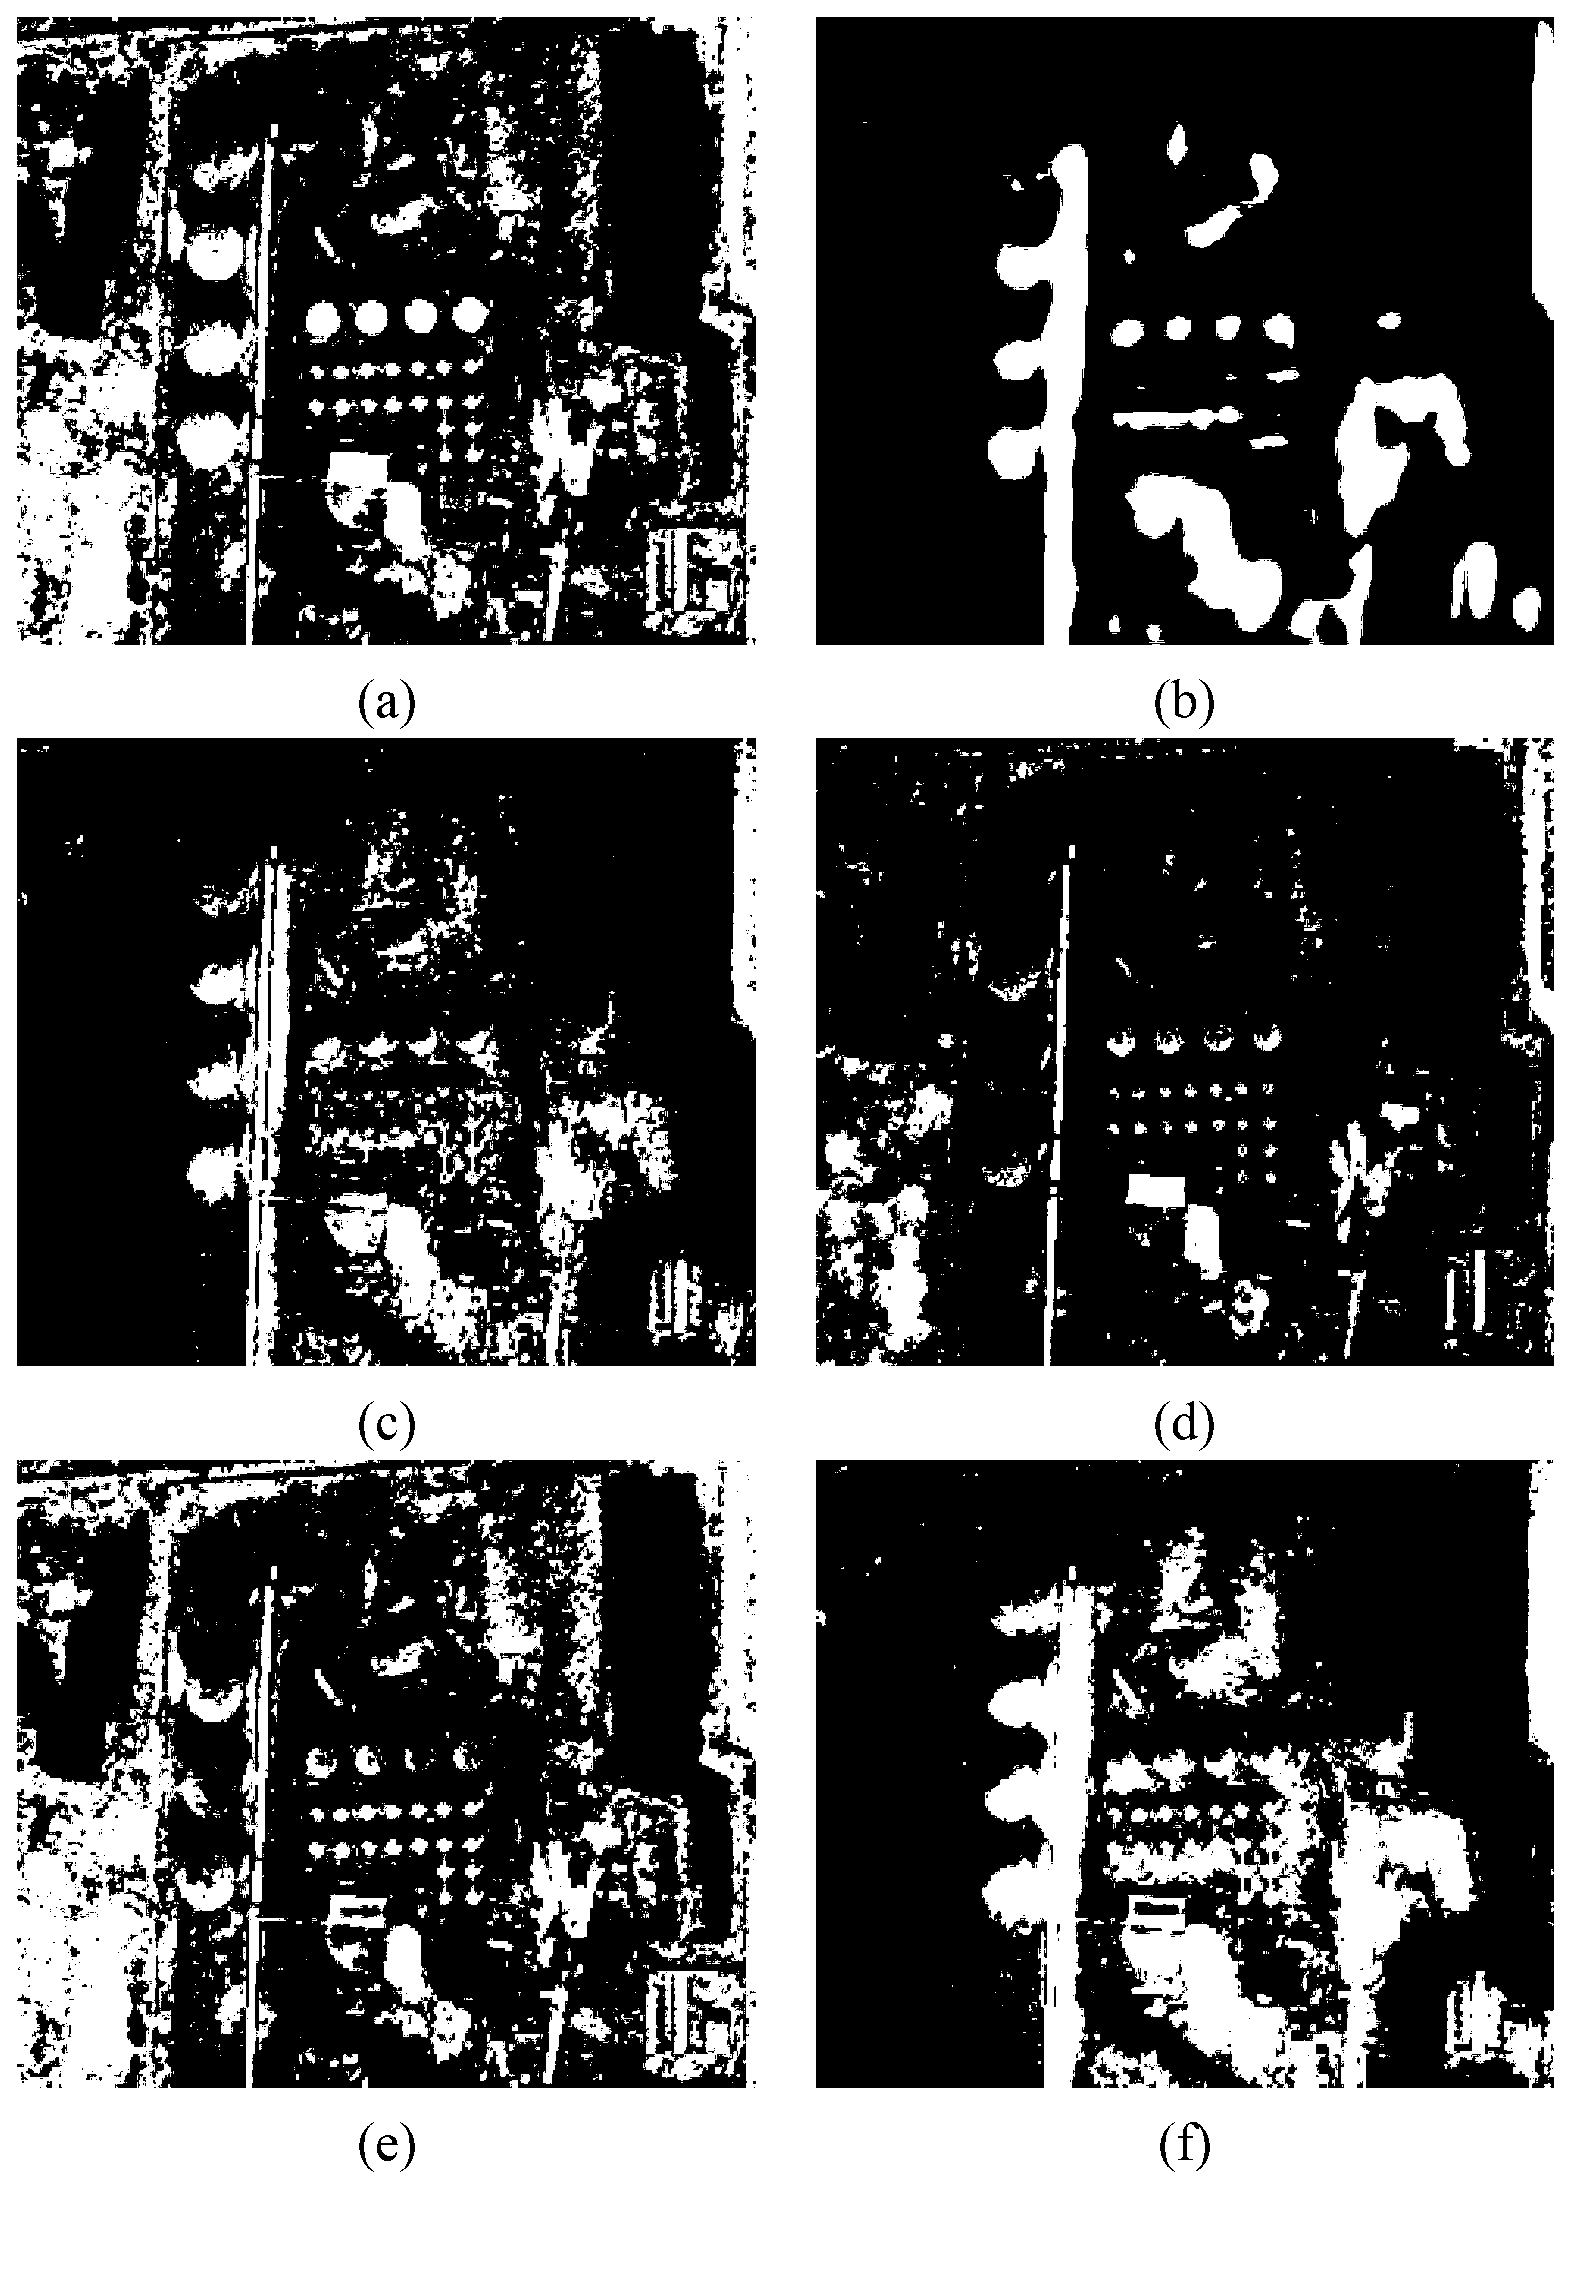 Method for fusing full-color and multi-spectral images on basis of fitting for substituted components